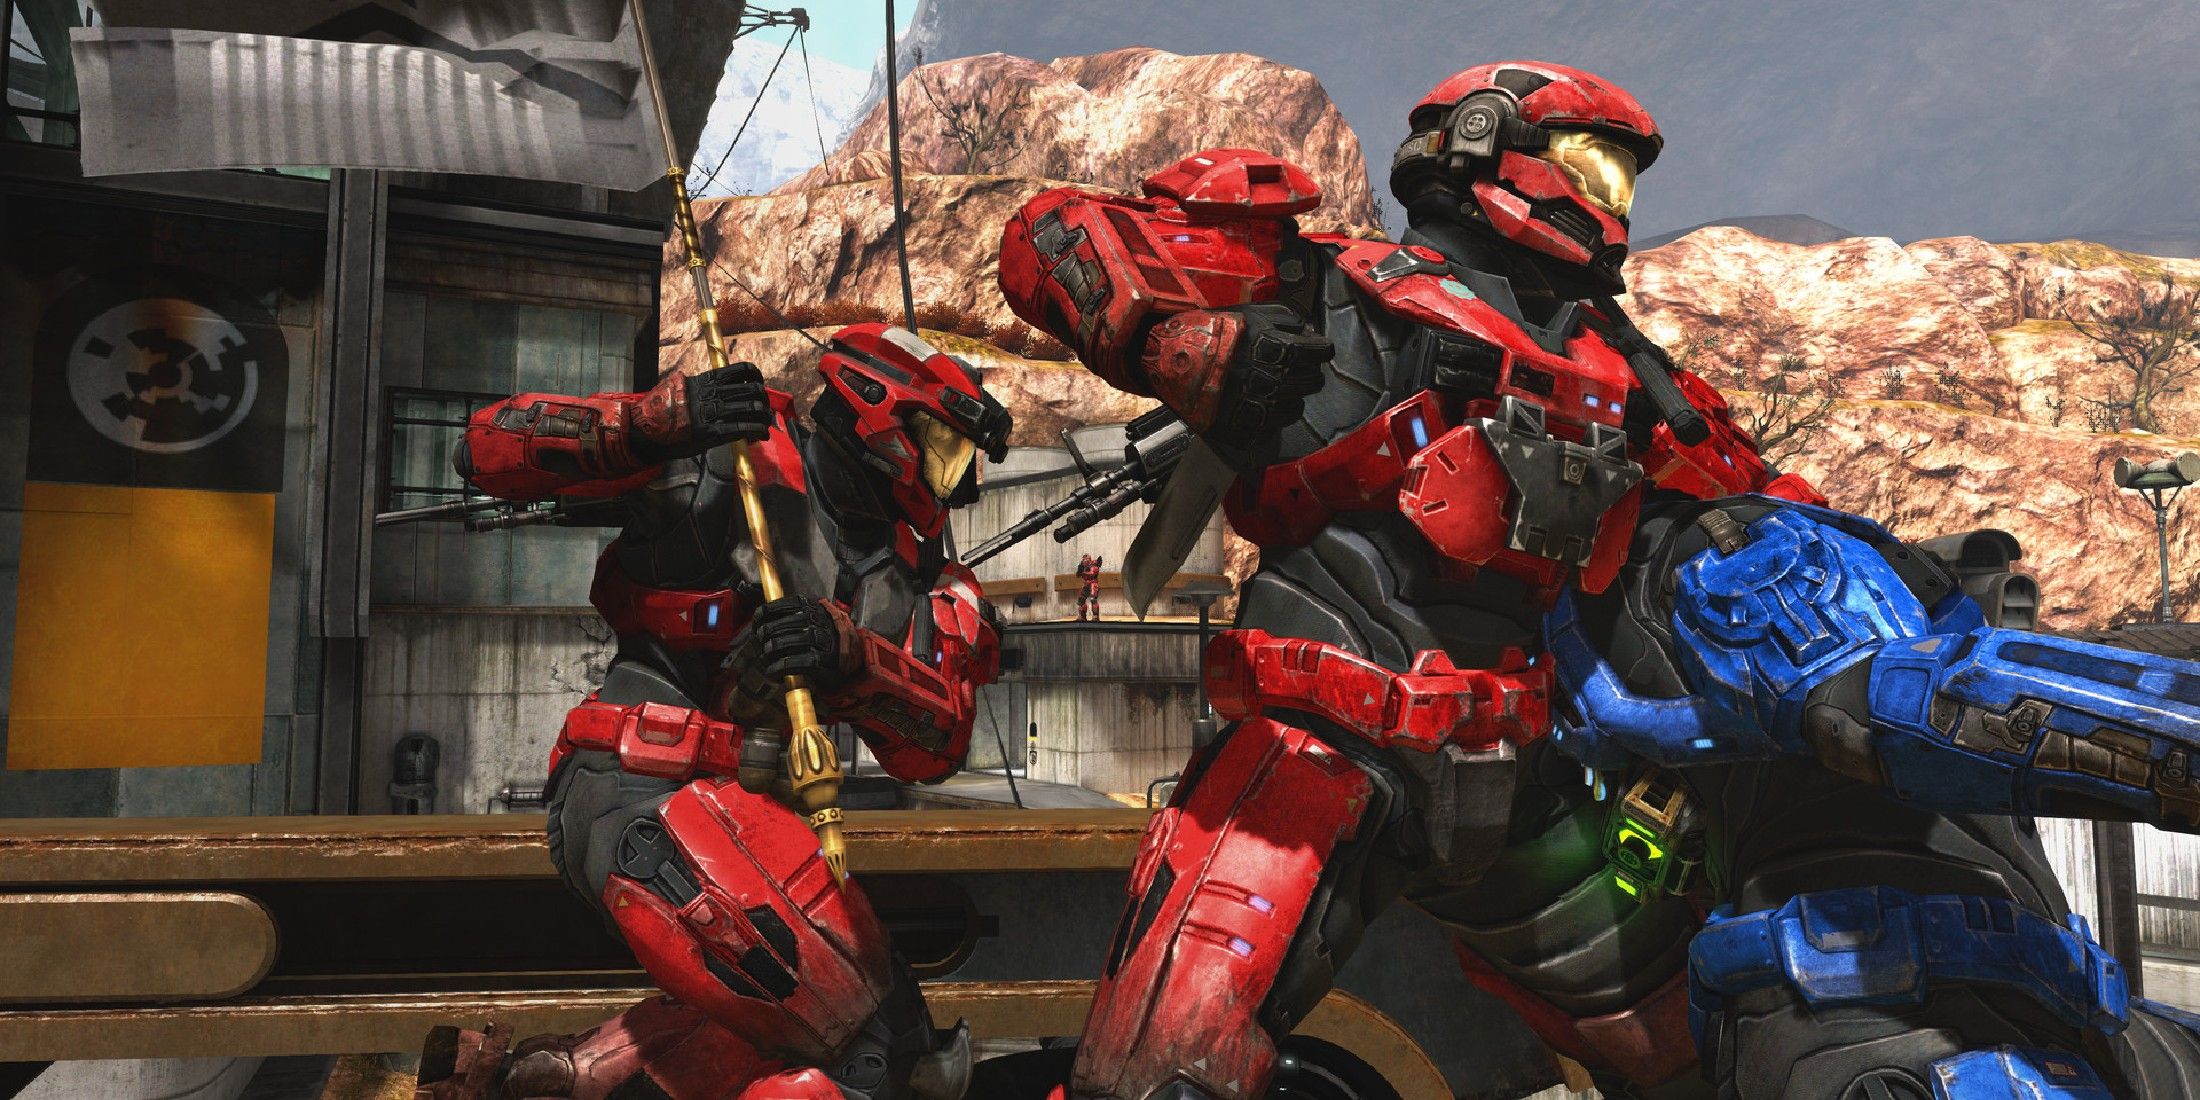 halo reach multiplayer capture the flag red team stealing flag and attacking blue team